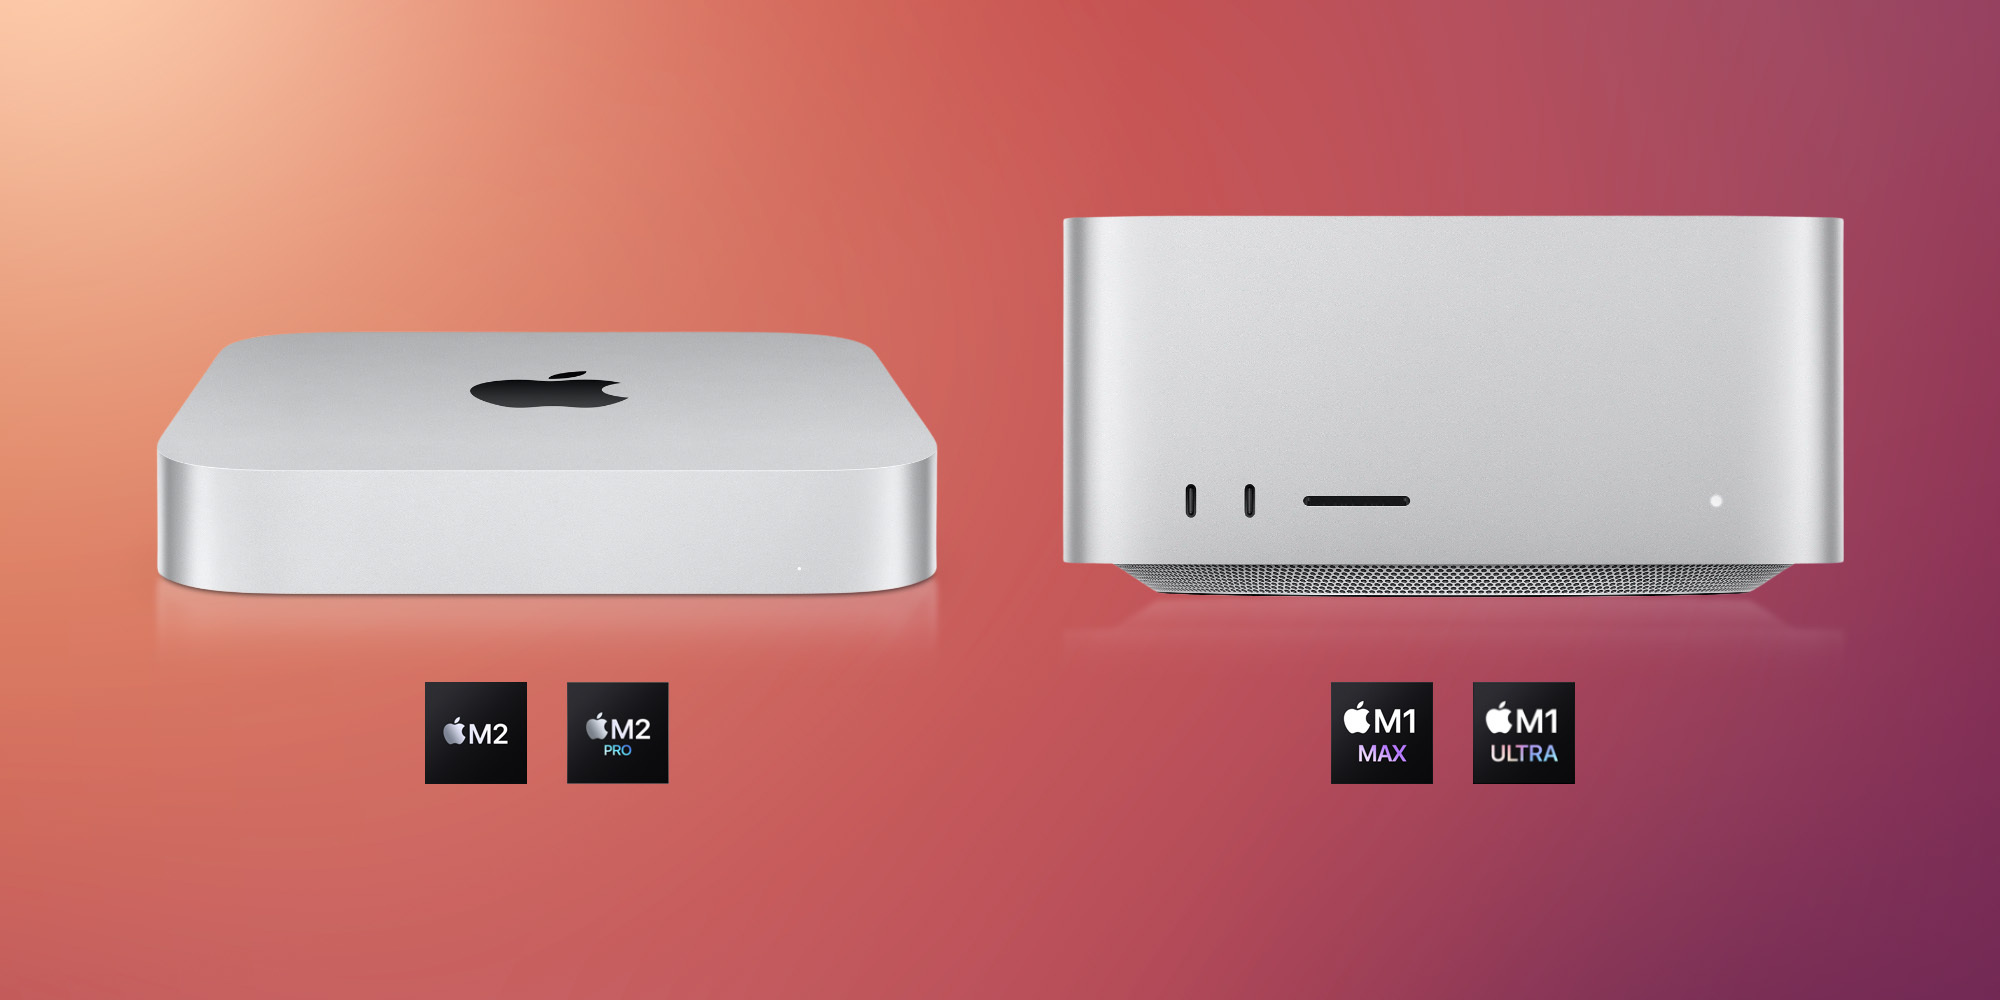 Mac mini: History, specs, pricing, review, and deals - 9to5Mac